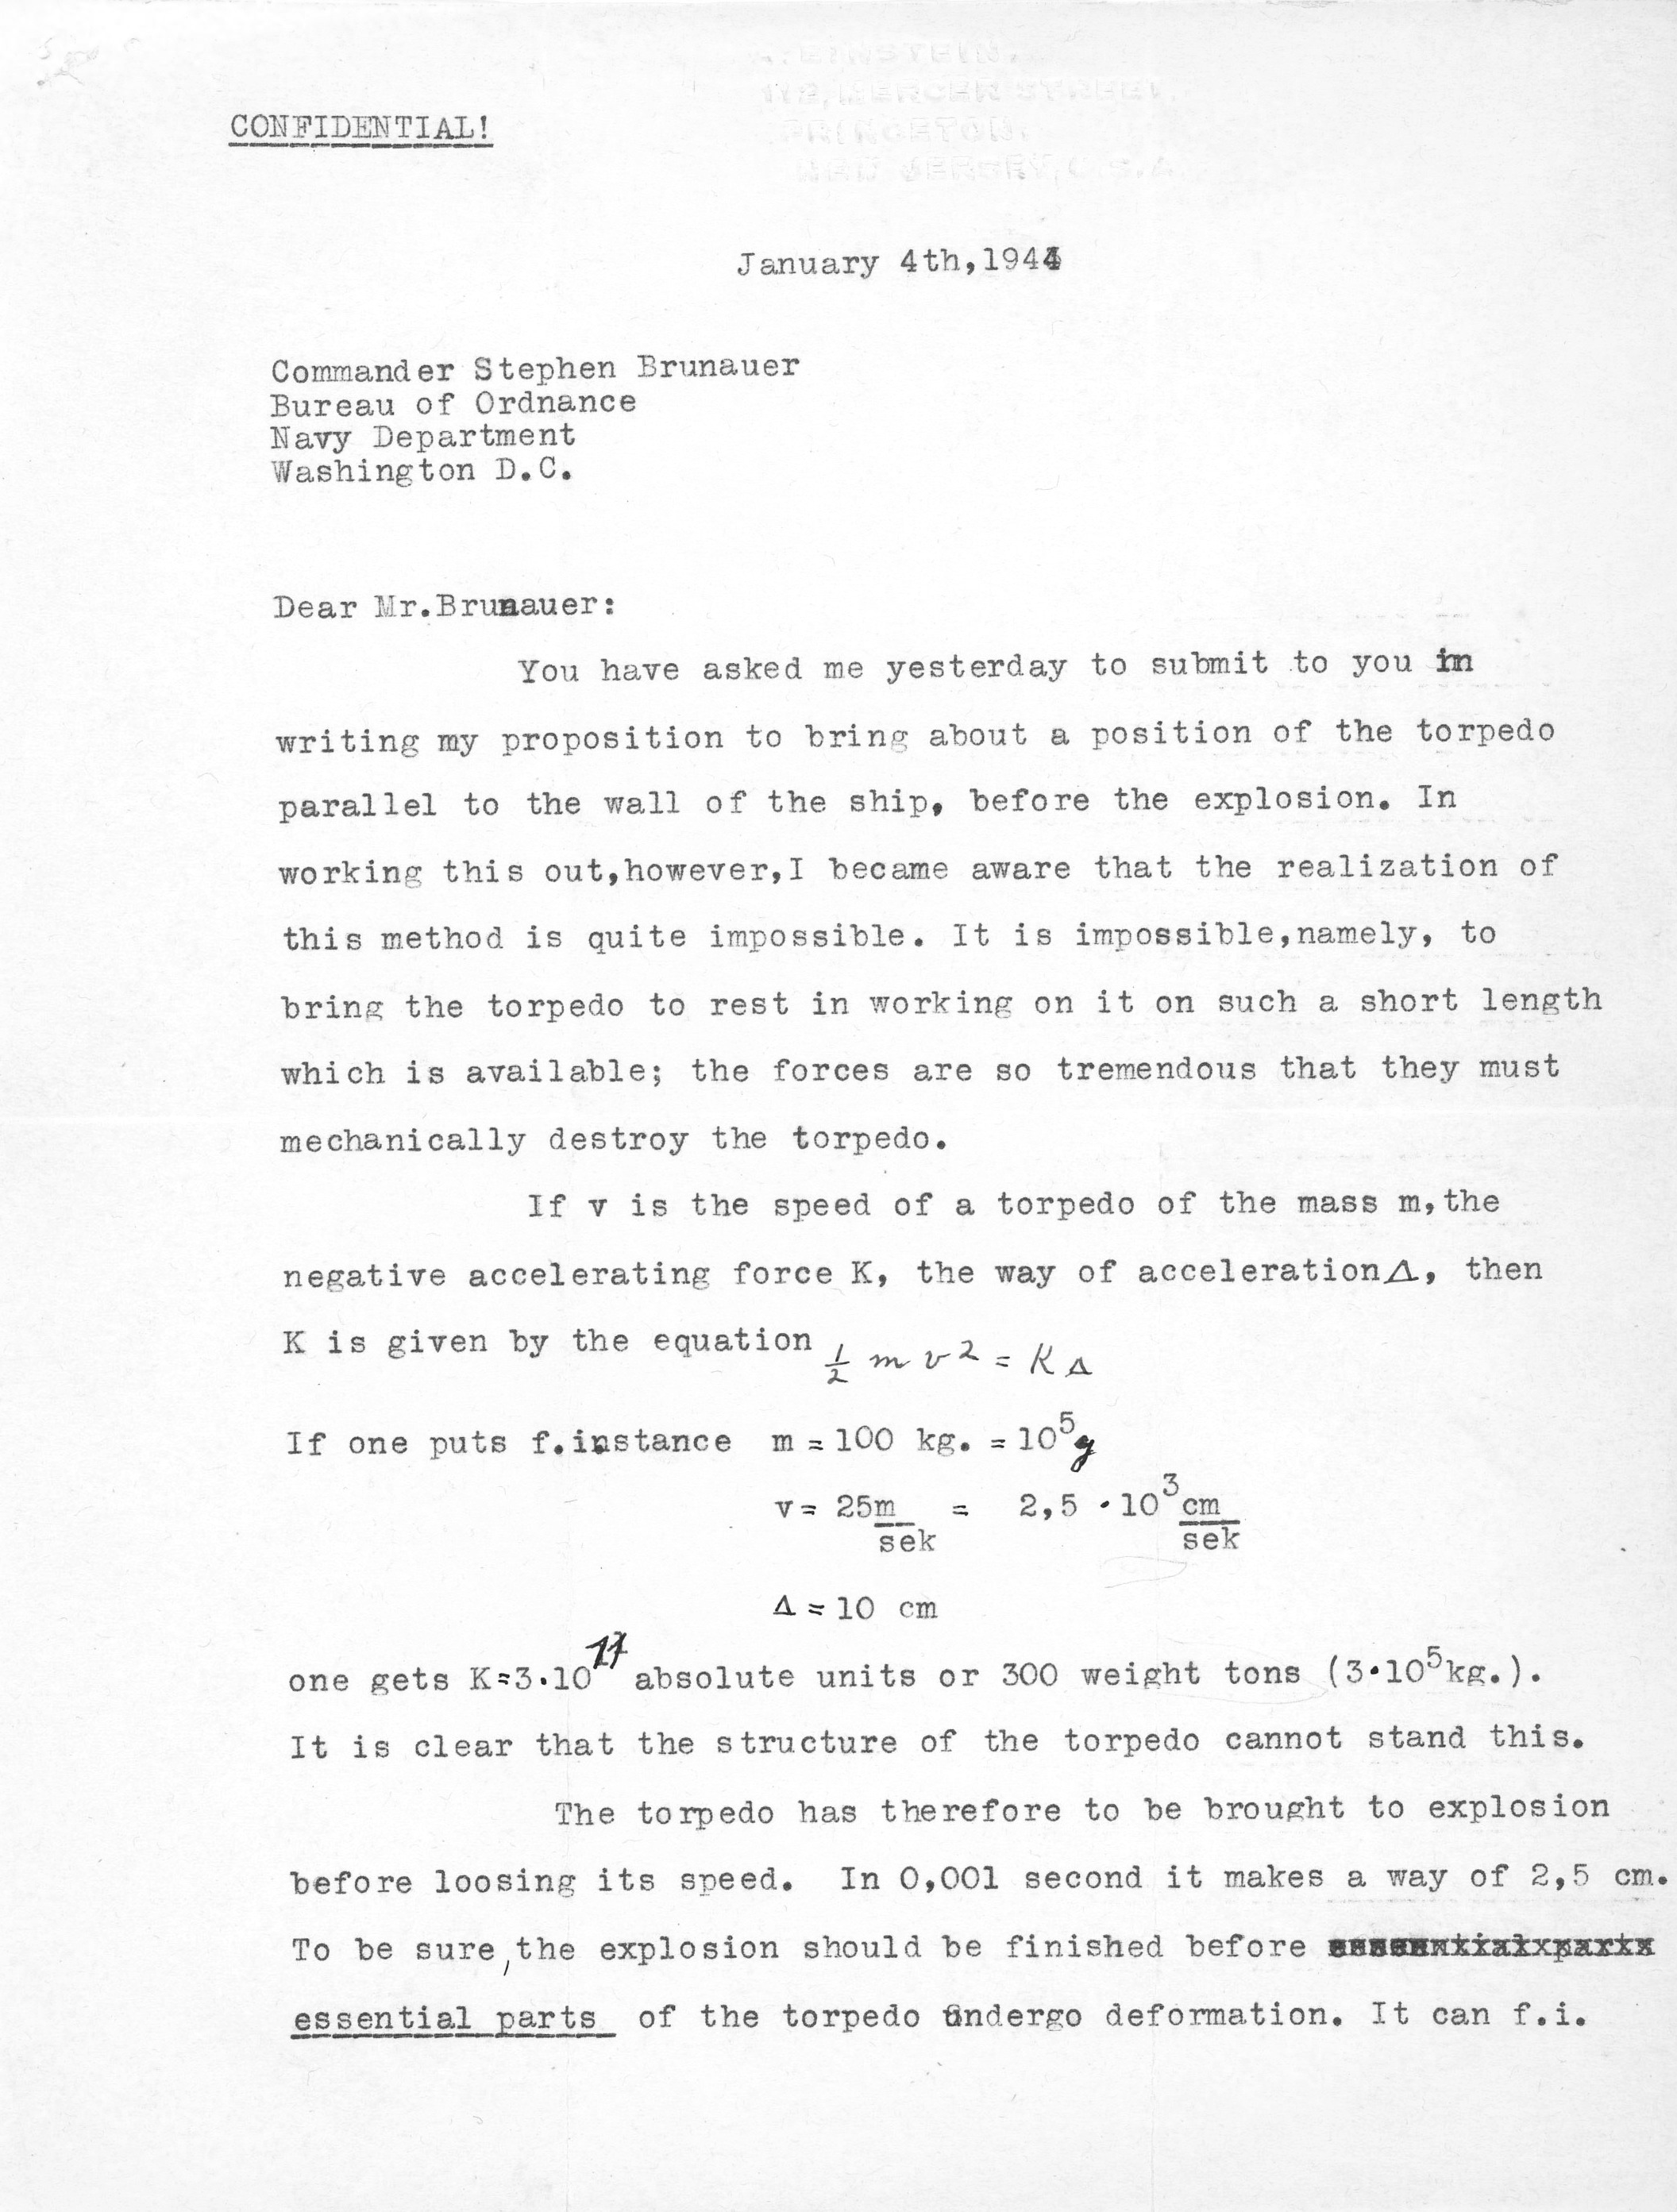 Letter from Albert Einstein to the United States Navy’s Bureau of Ordnance describing the forces experienced by a torpedo’s firing pin mechanism upon impact with a solid object, 4 Jan 1944, page 1 of 2.